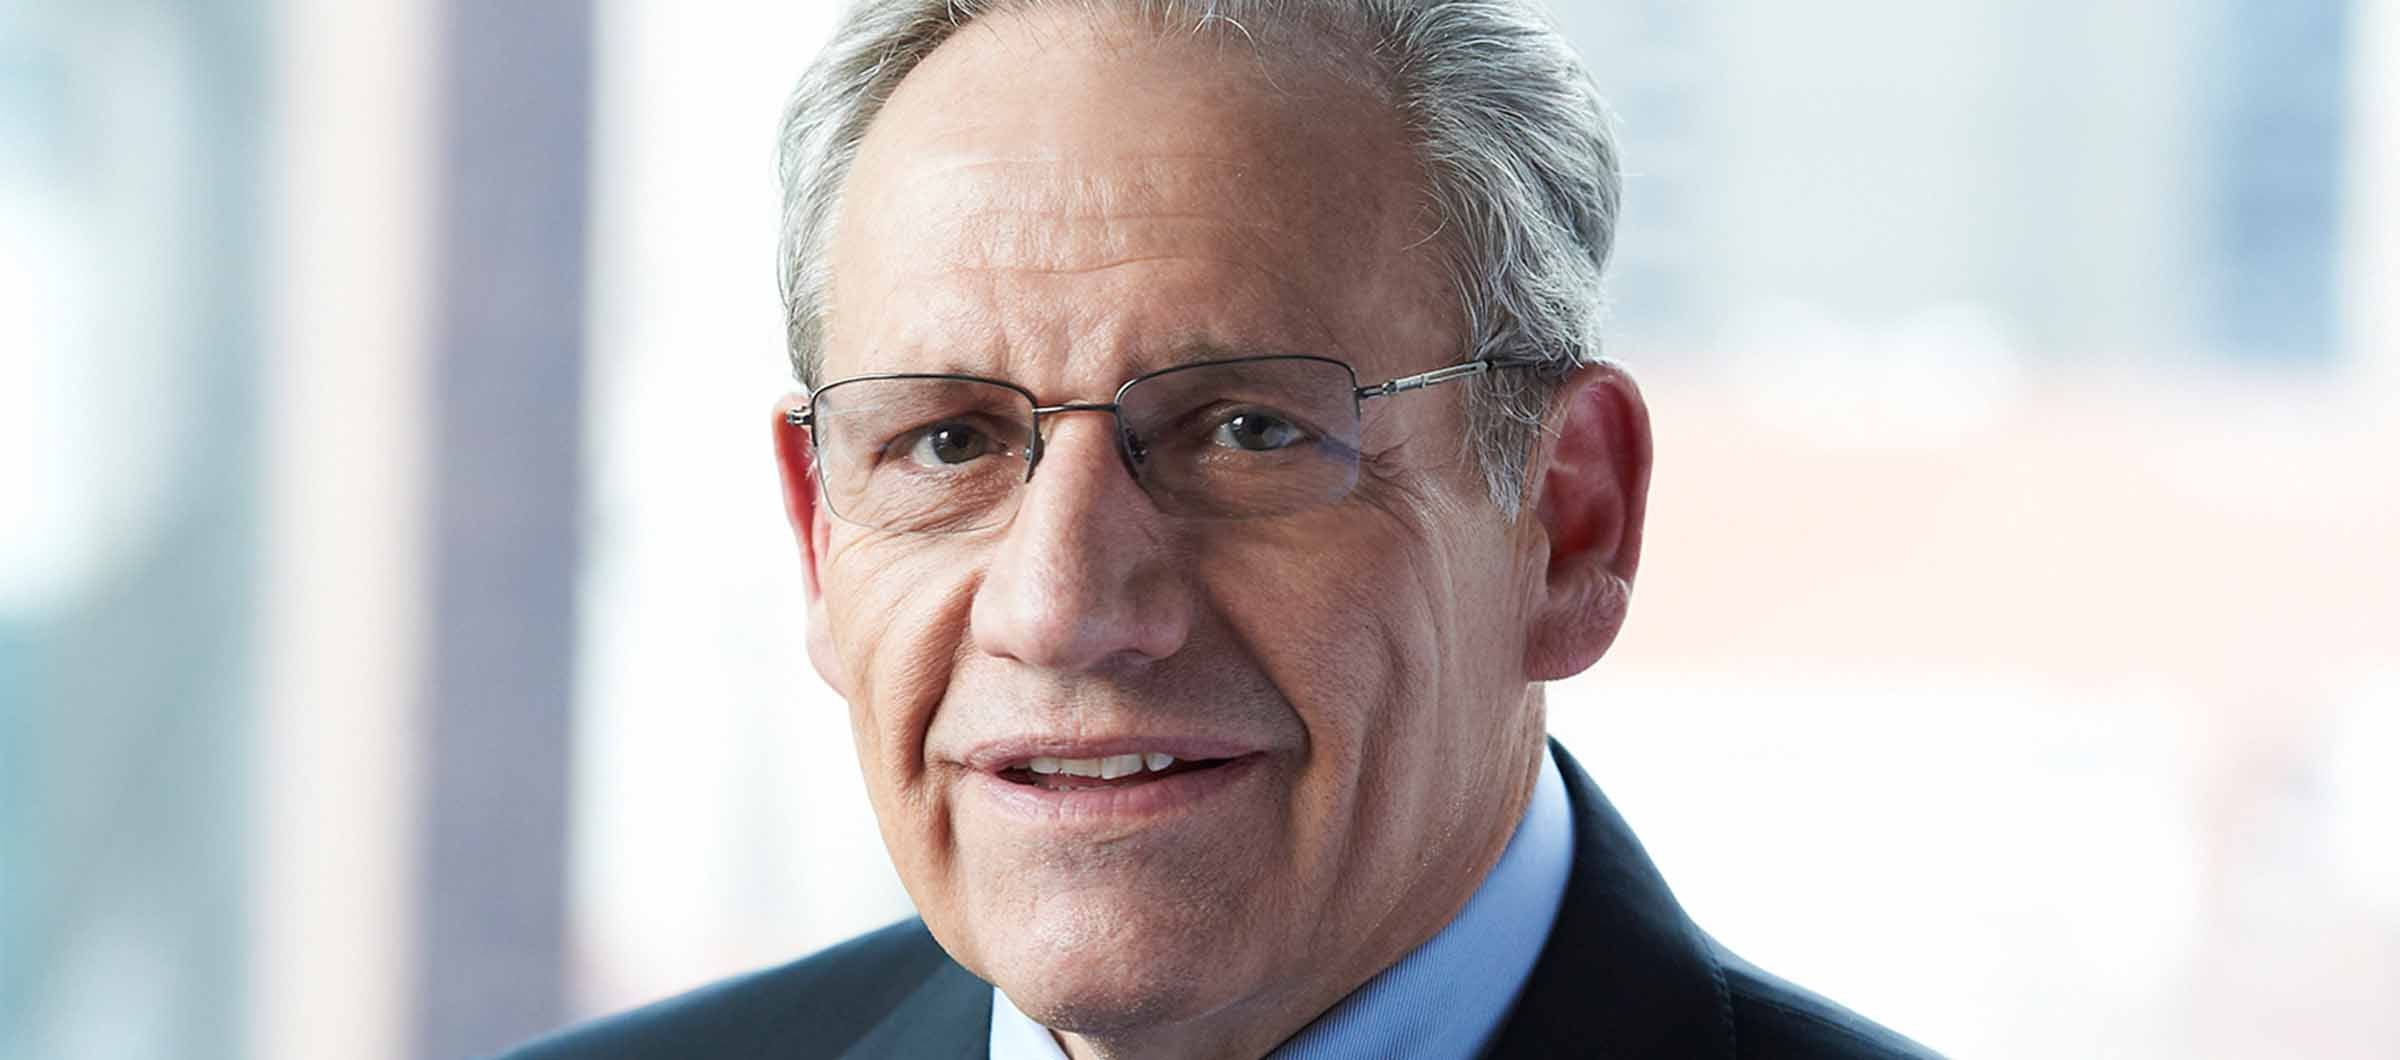 An Evening with Bob Woodward